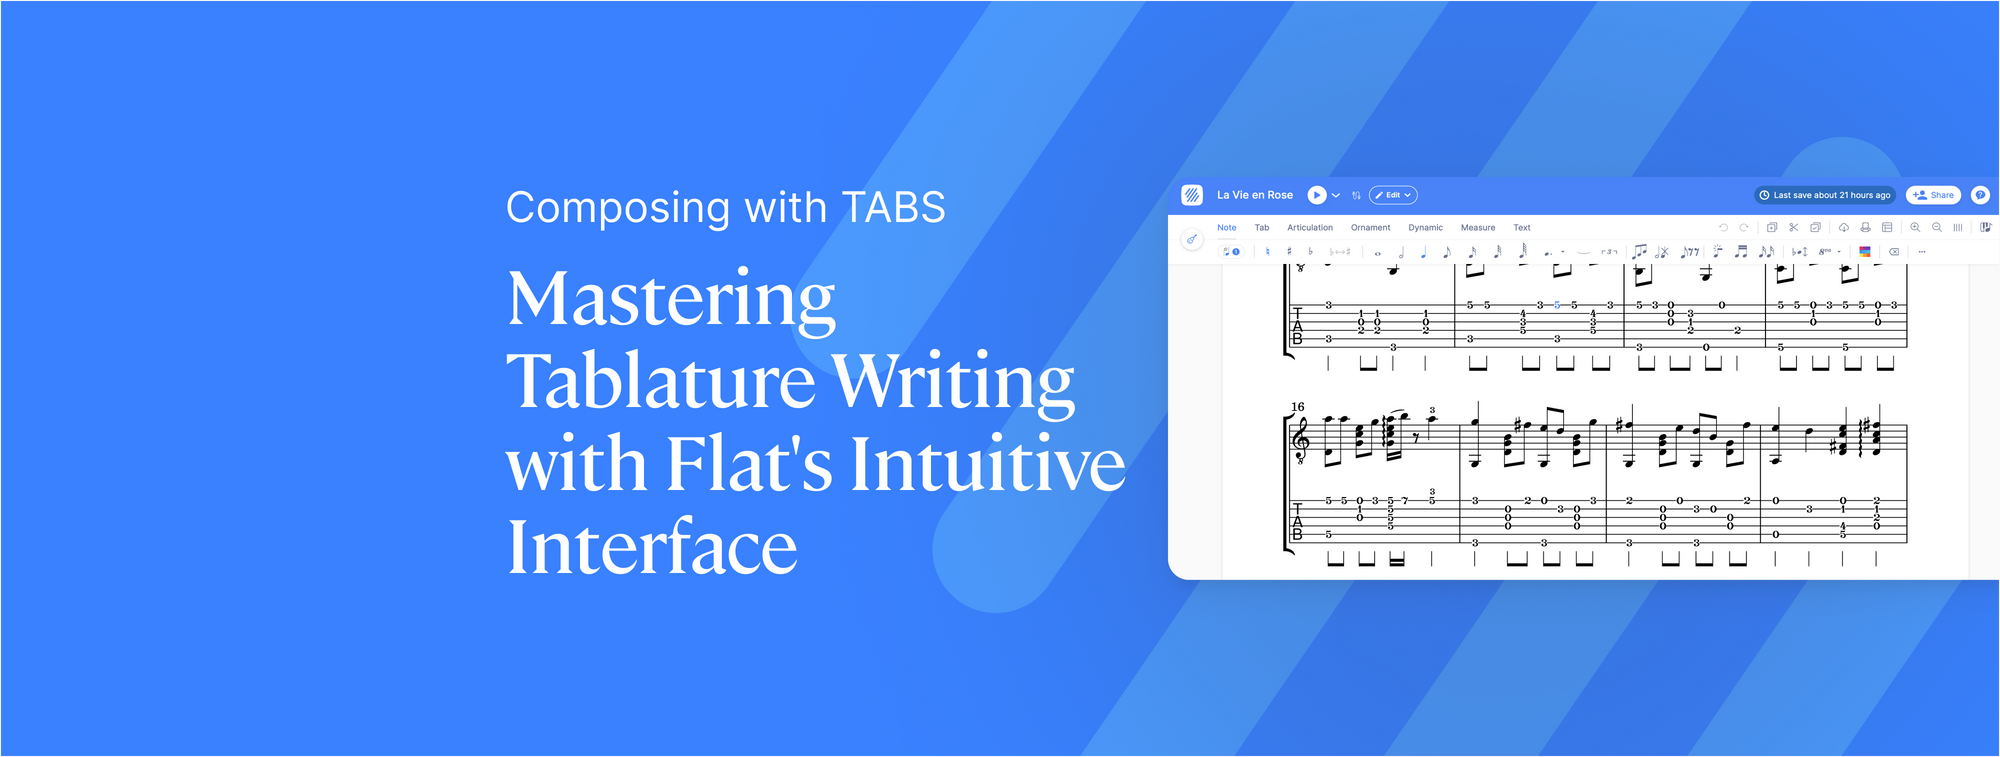 Mastering Tablature Writing with Flat's Intuitive Interface